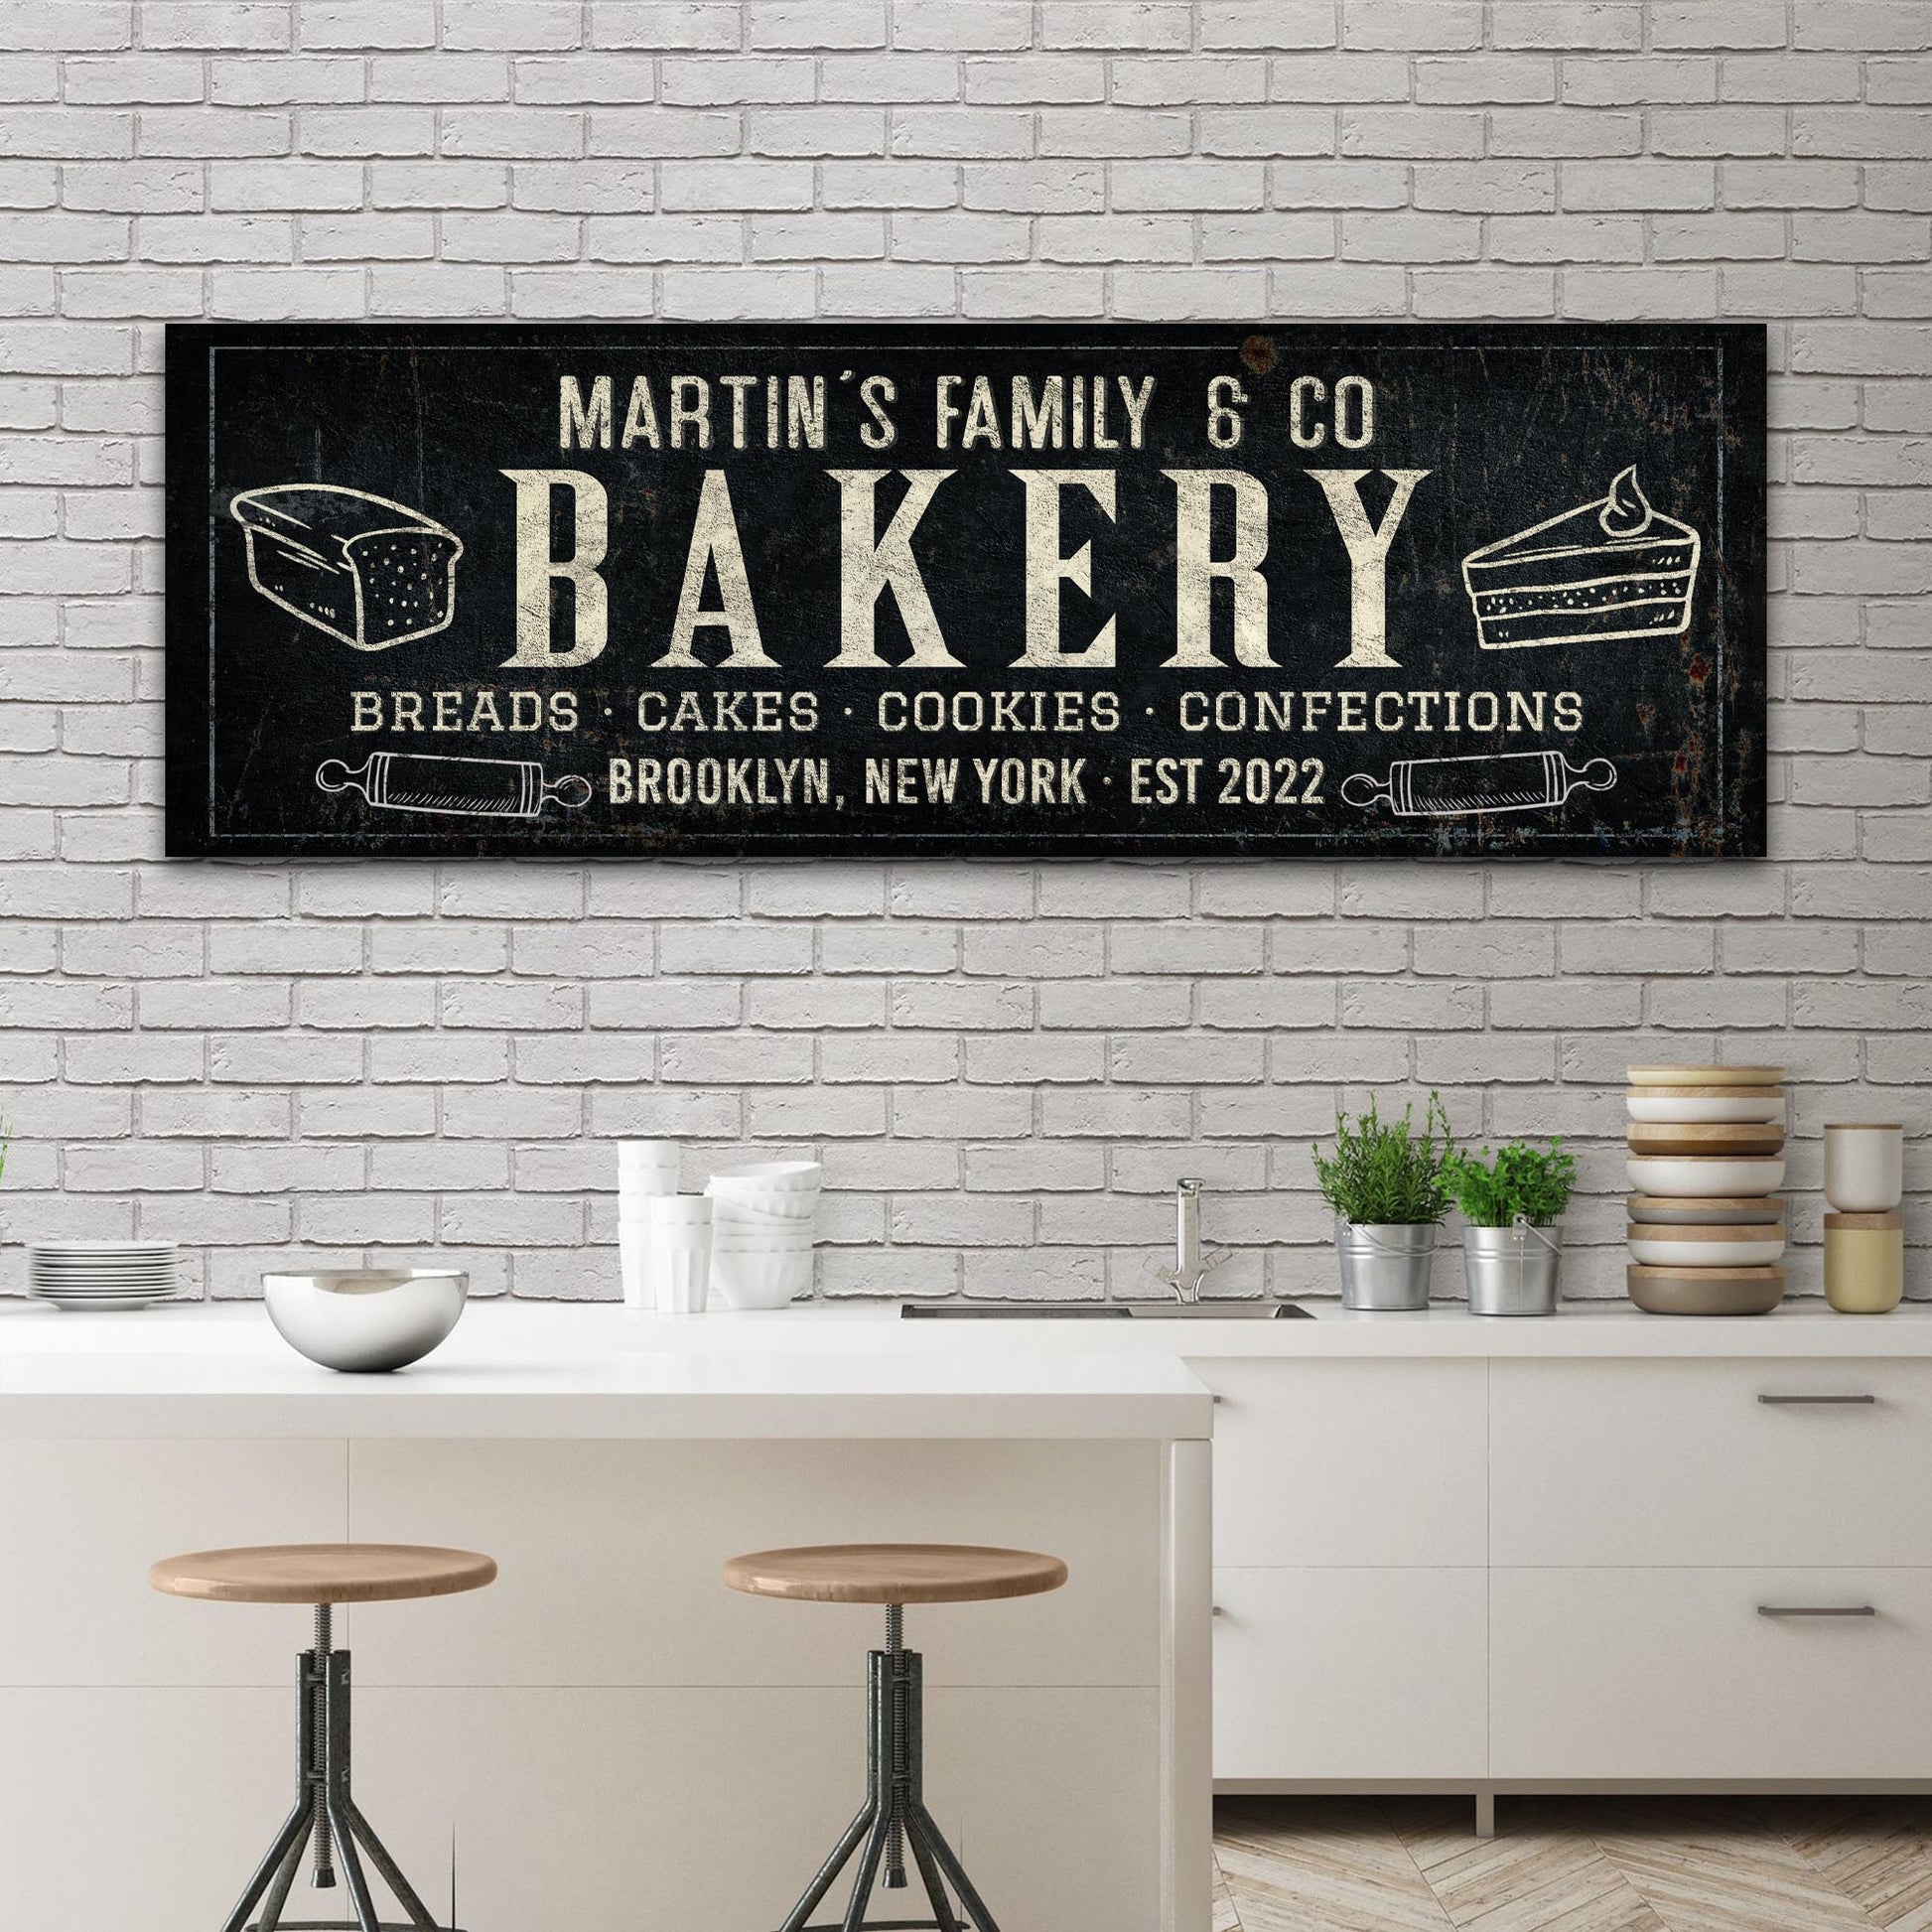 Breads, Cakes, Cookies, Confections Bakery Sign - Image by Tailored Canvases